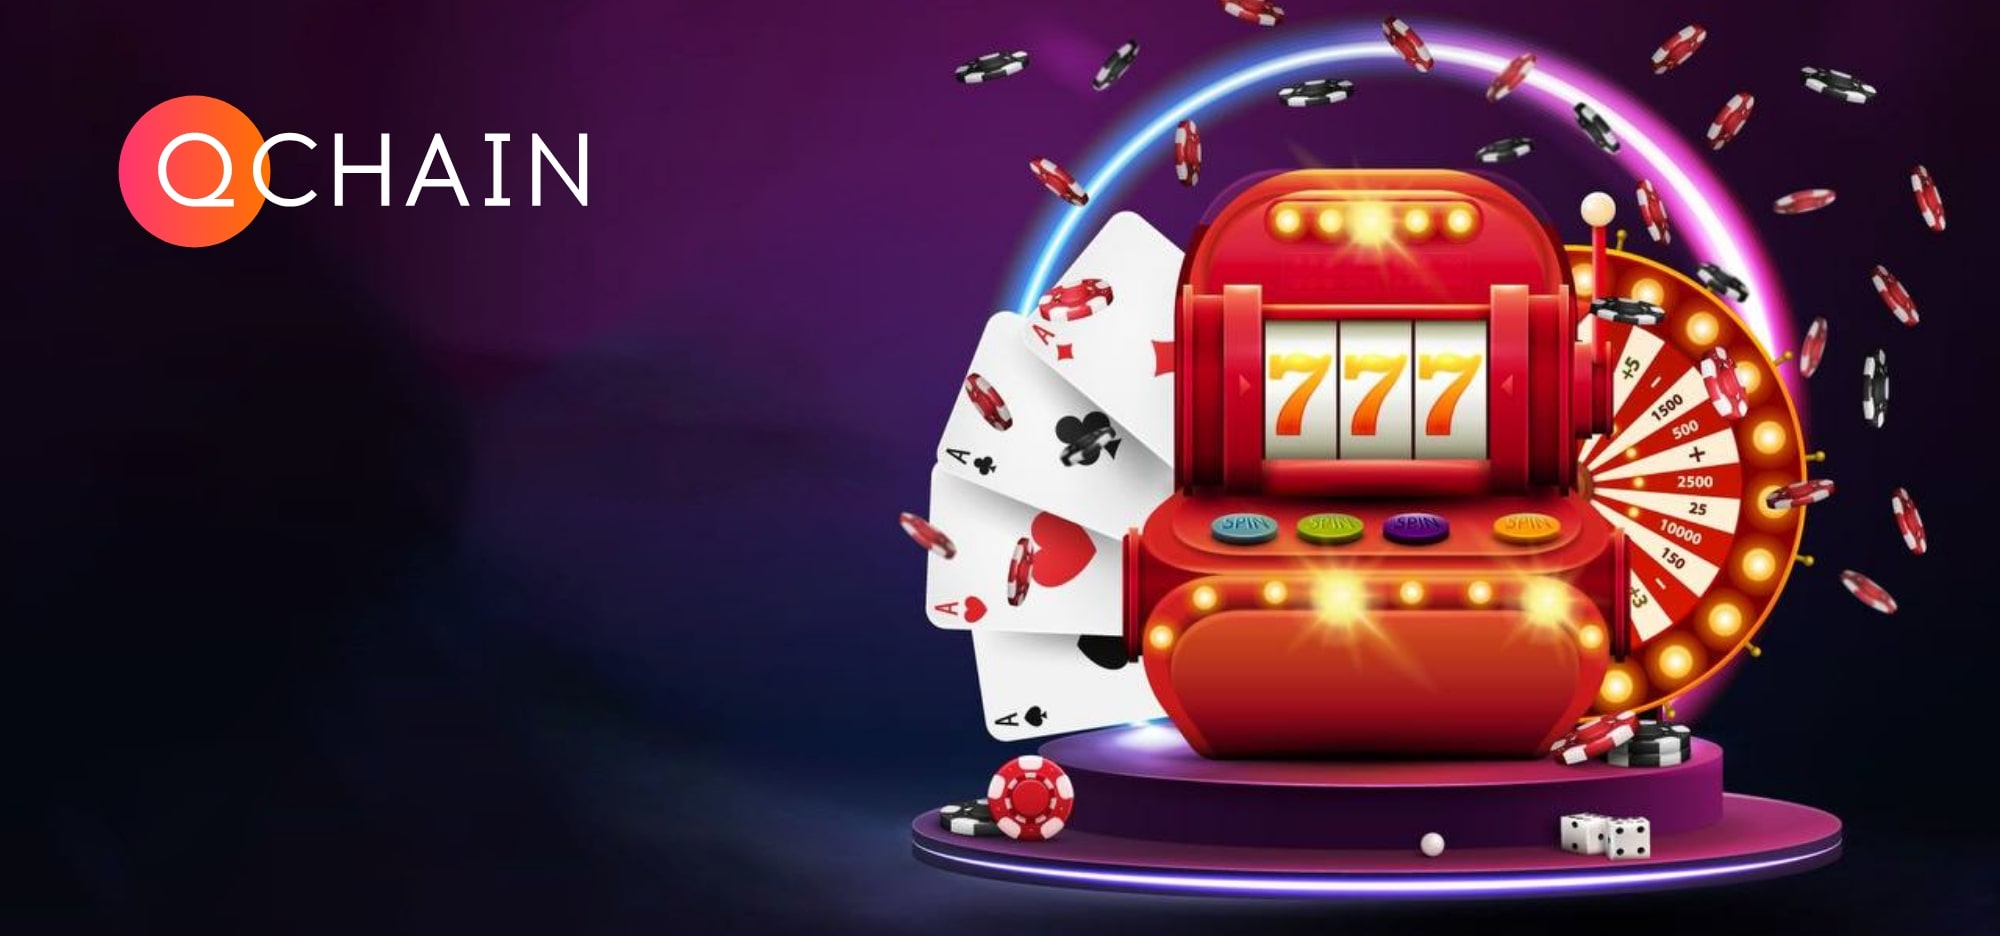 What do you need to know about XGAME CHAIN blockchain casino?